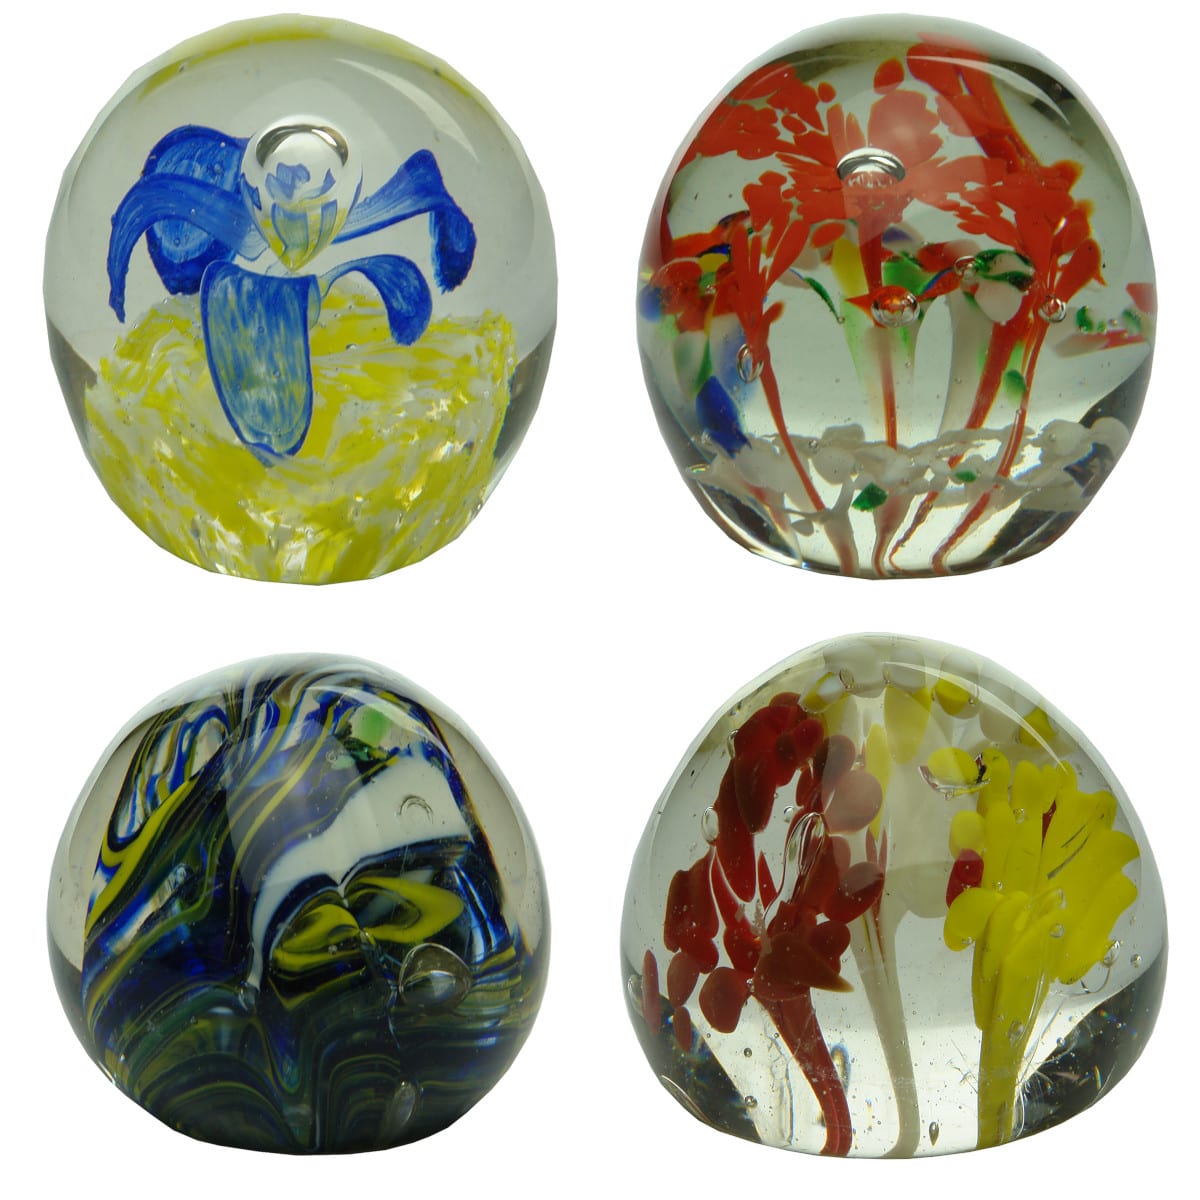 4 Glass Paperweights. Blue flower on yellow; Squashed egg, red flowers; Swirled Blue, Yellow, White; Yellow & White Flowers.